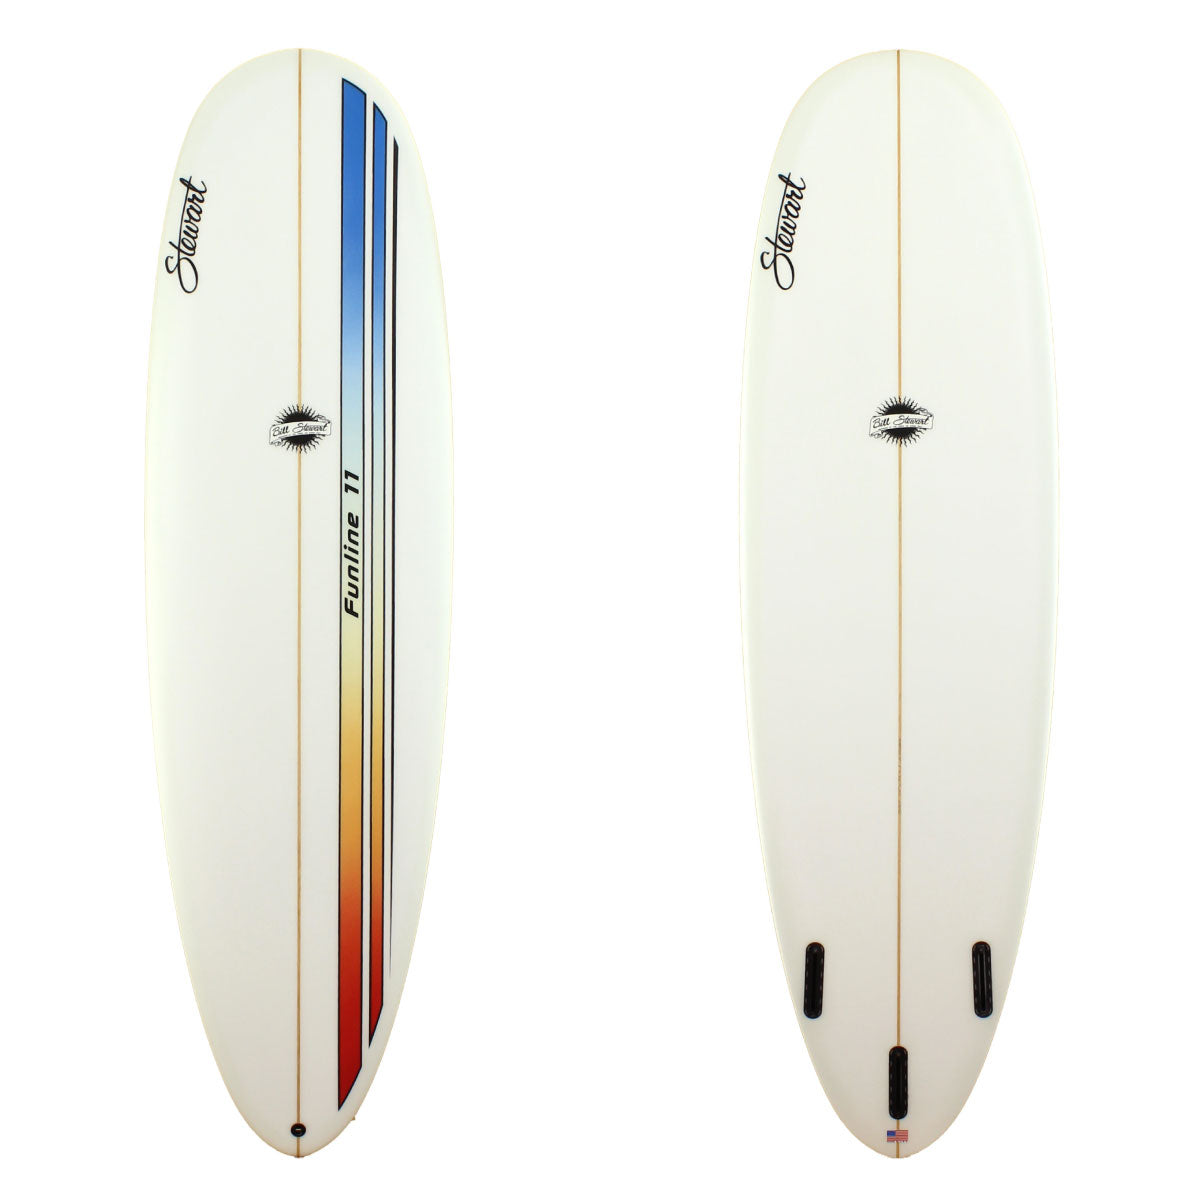 Stewart Surfboards 7'0 FUNLINE 11 with blue, yellow, red stripes with black pinlines, clear white bottom and rails